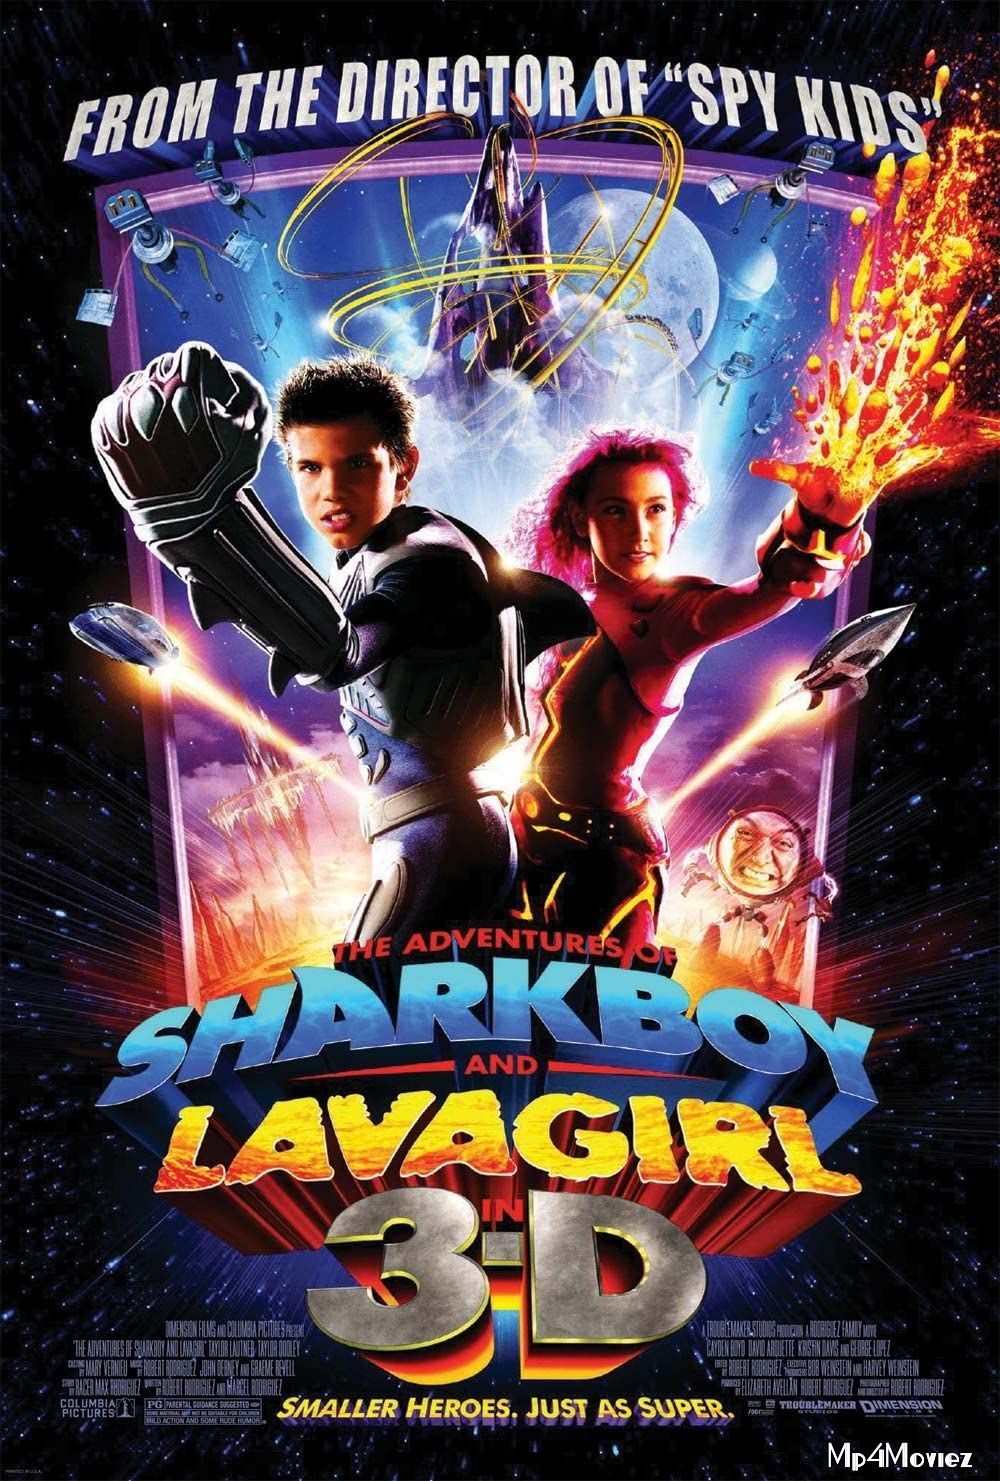 The Adventures of Sharkboy and Lavagirl (2005) Hindi Dubbed Movie download full movie